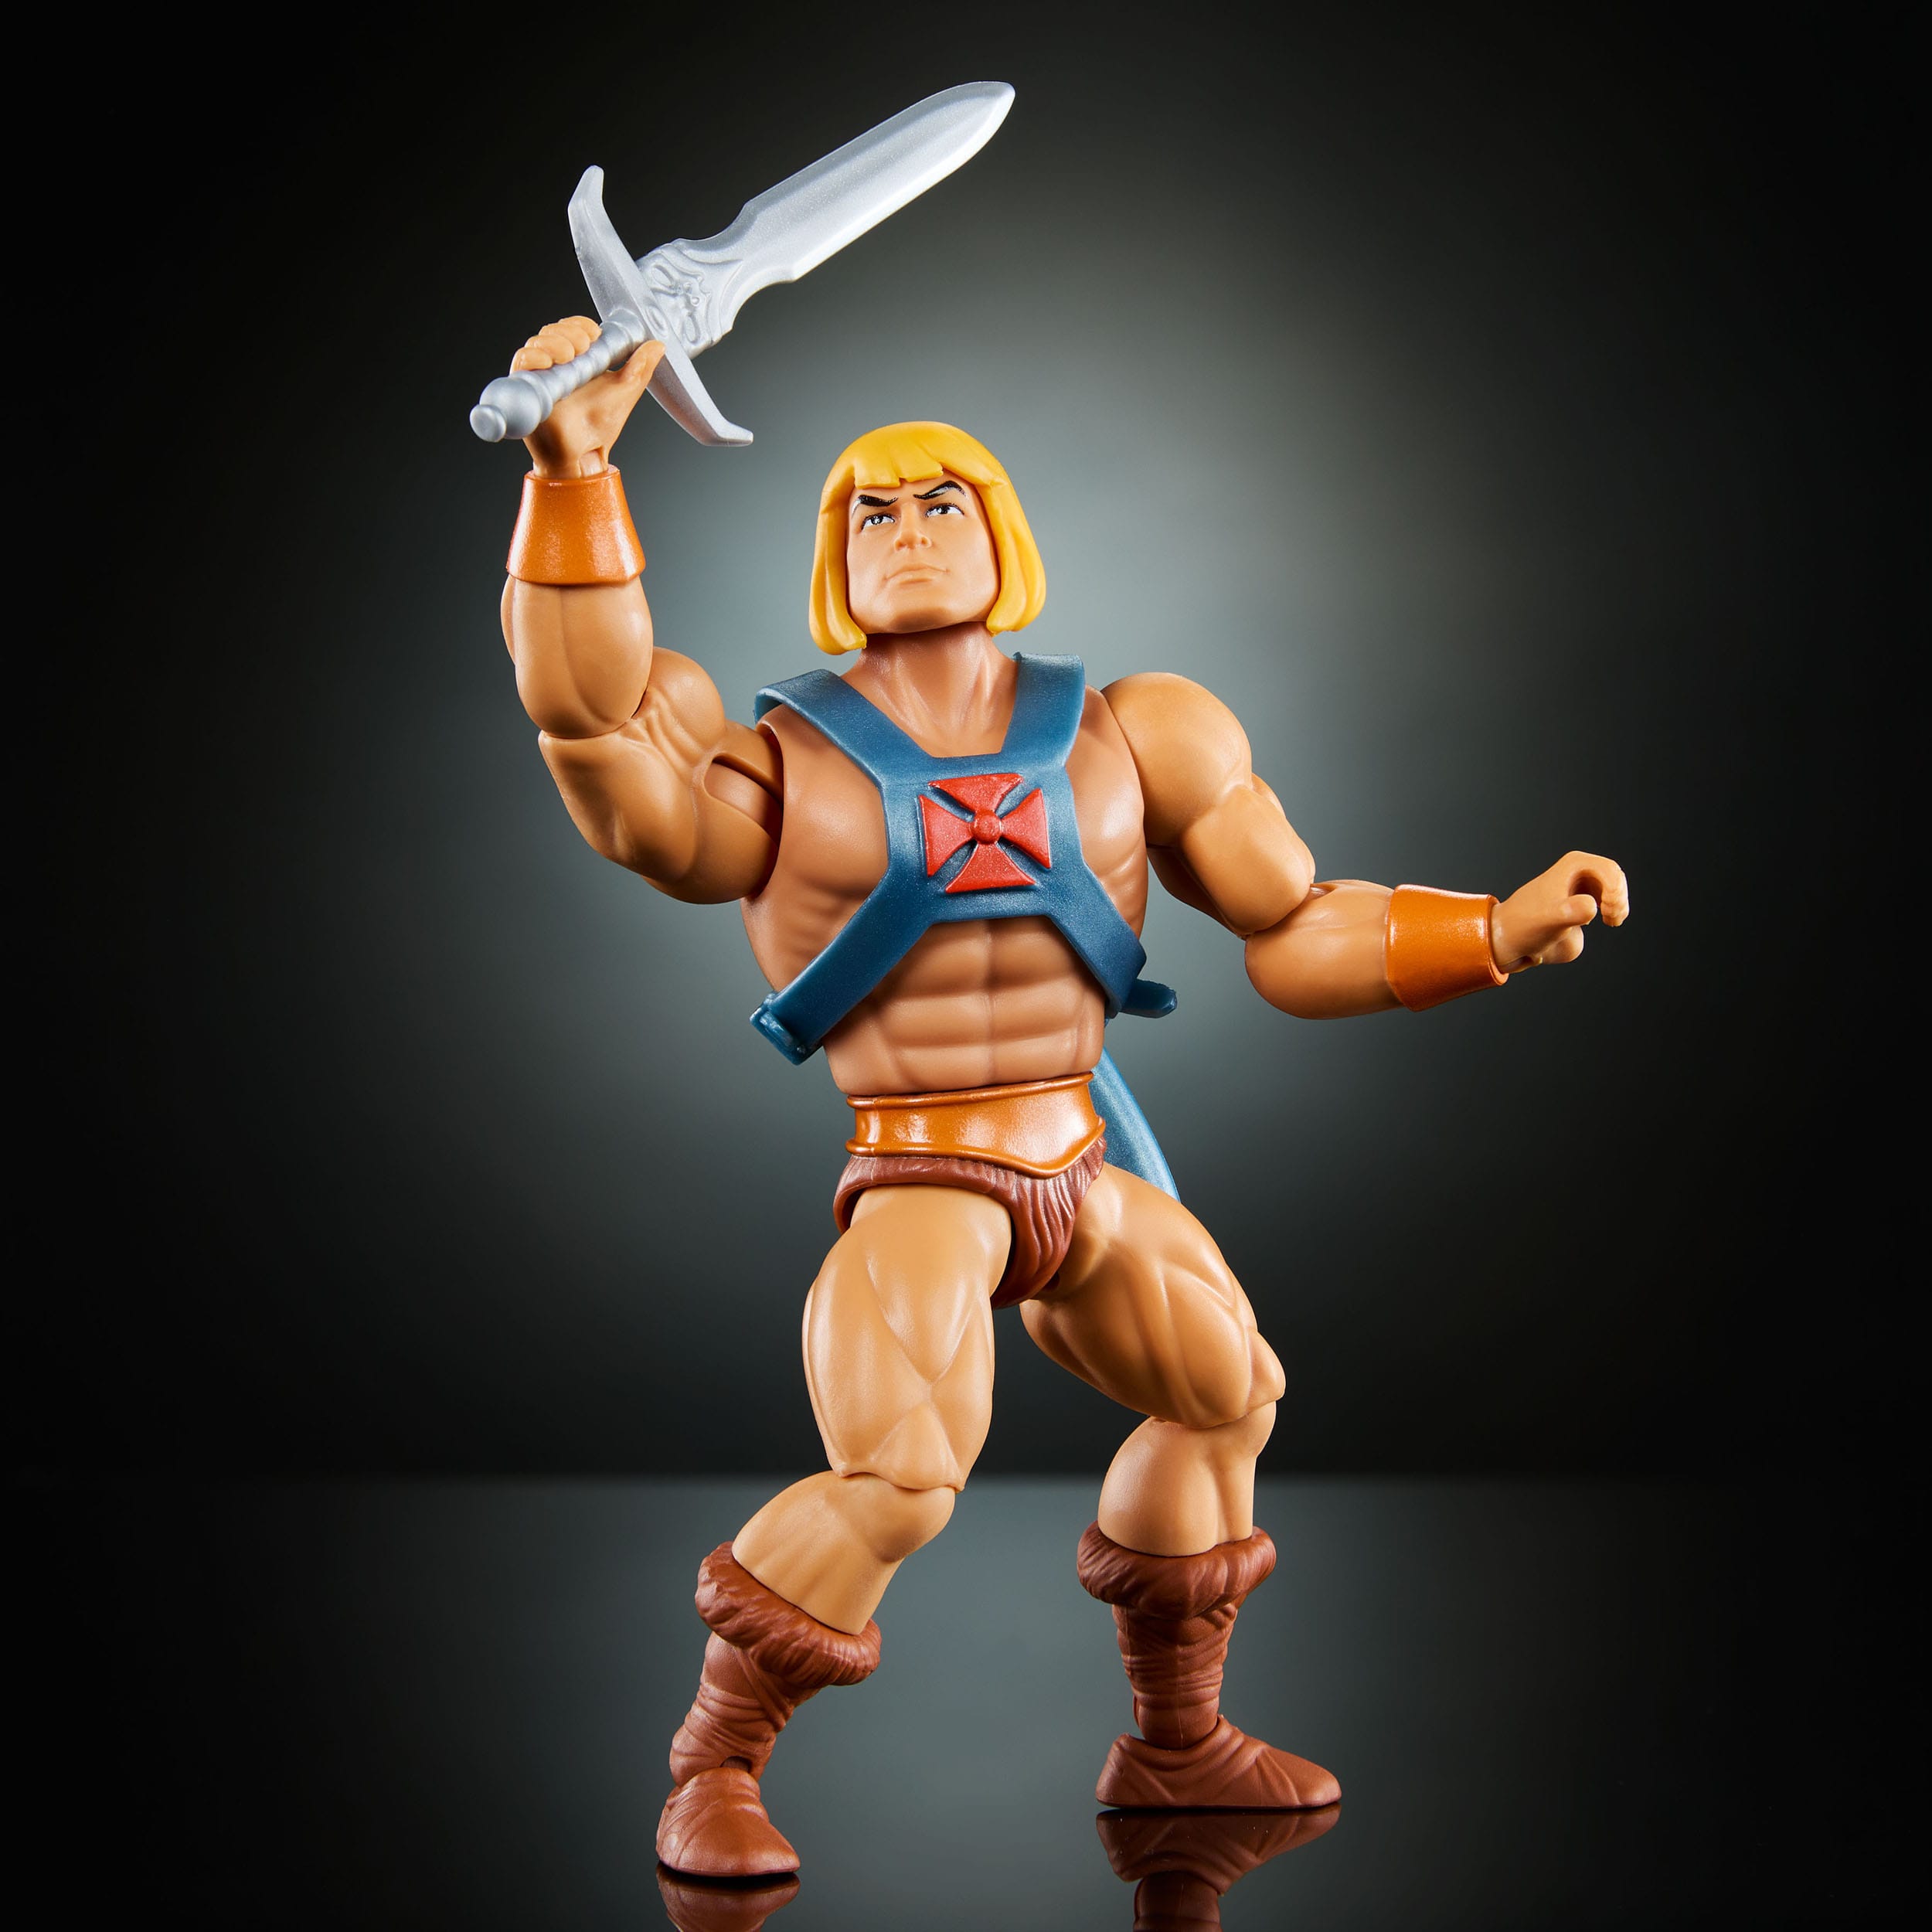  Masters of the Universe Origins Core Filmation He-Man Action Figure HYD17 0194735244249